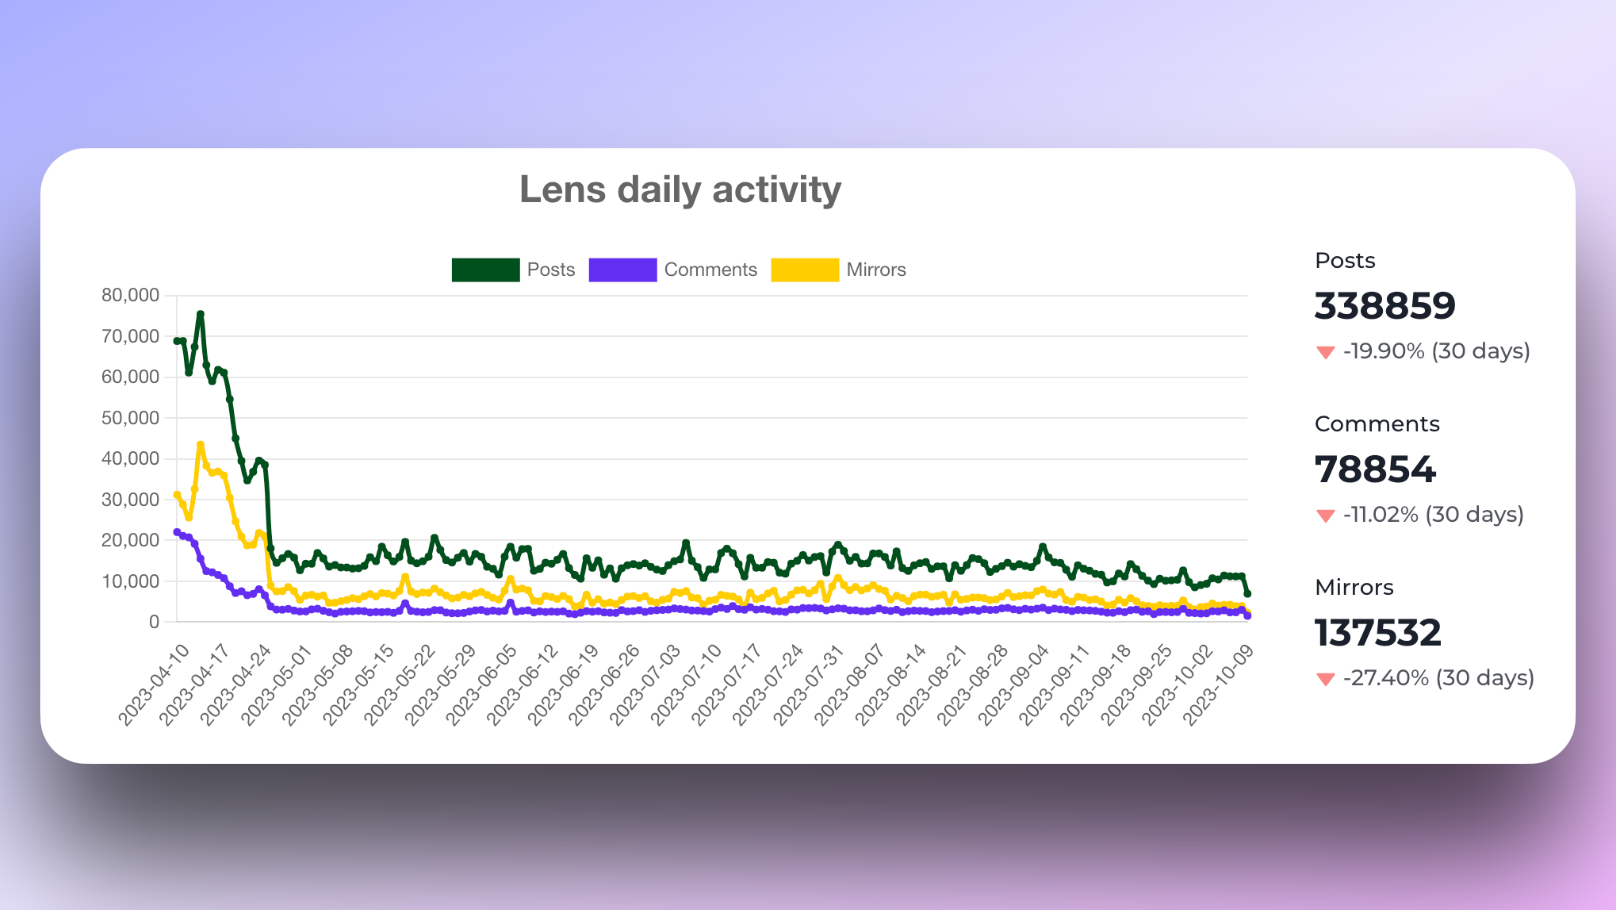 Lens daily activity statistics from source: Zurf.social - https://hey.xyz/posts/0xe222-0x032f